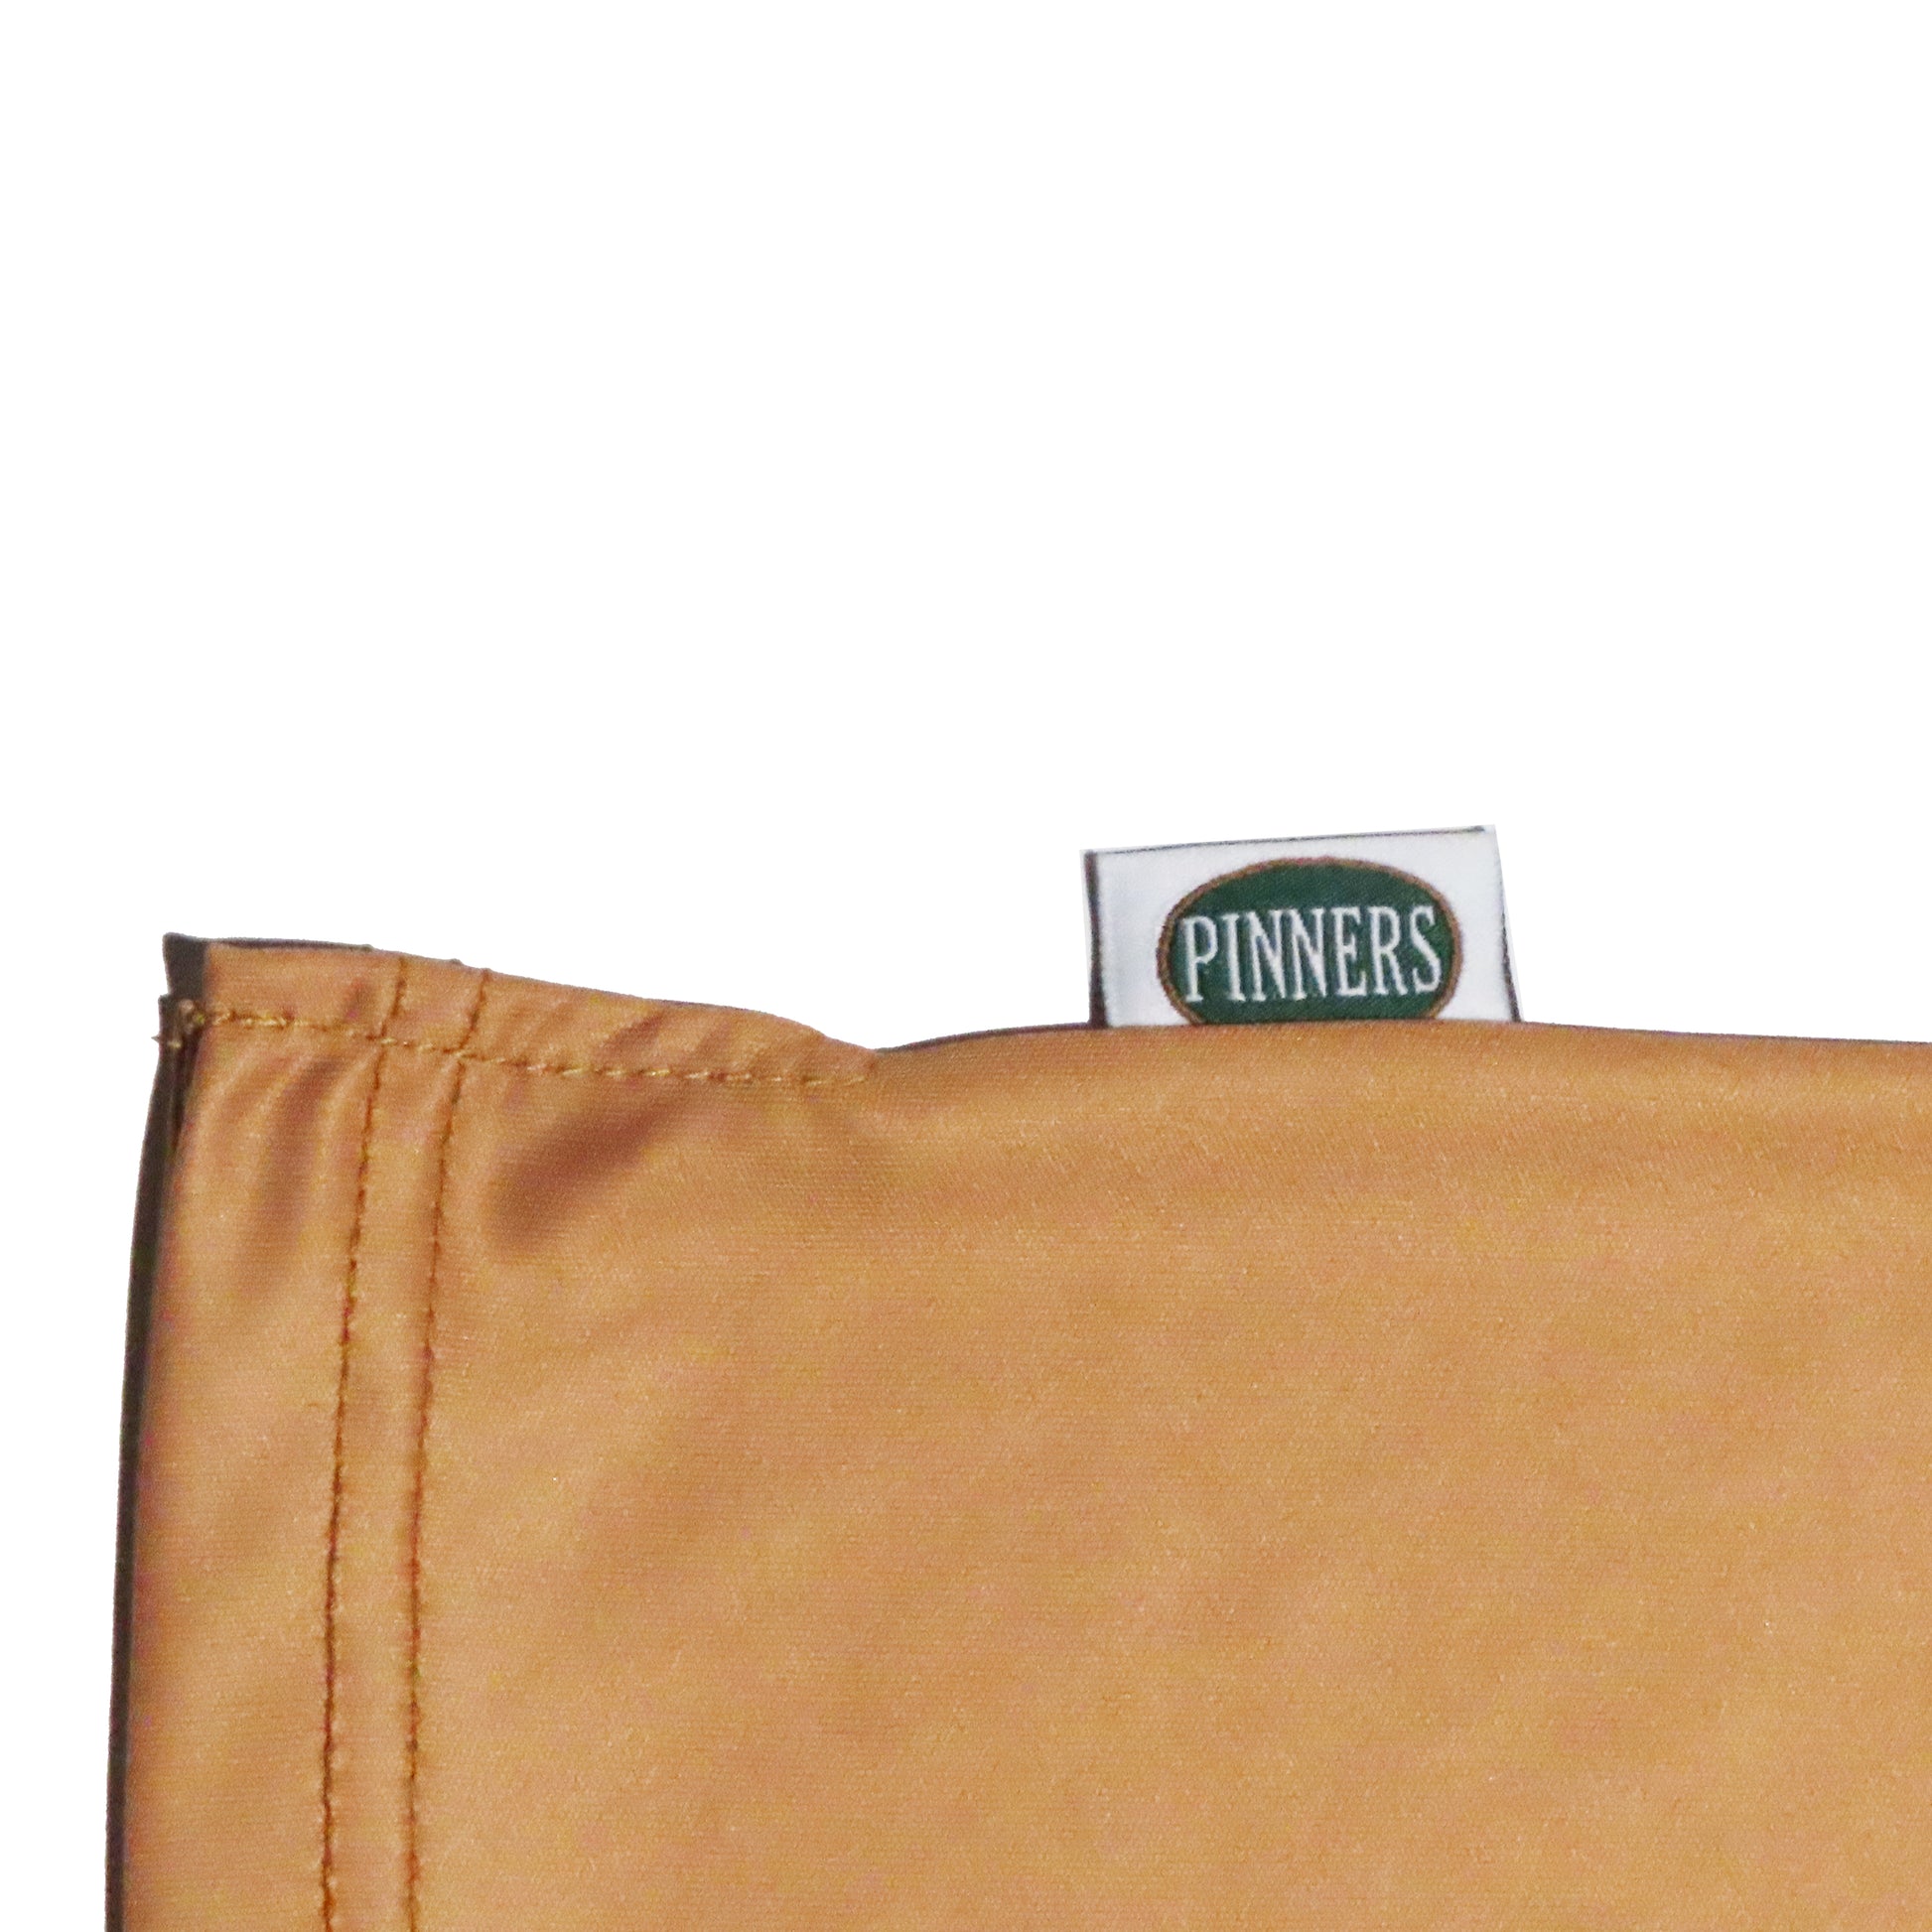 Pin by Pinner on Purses